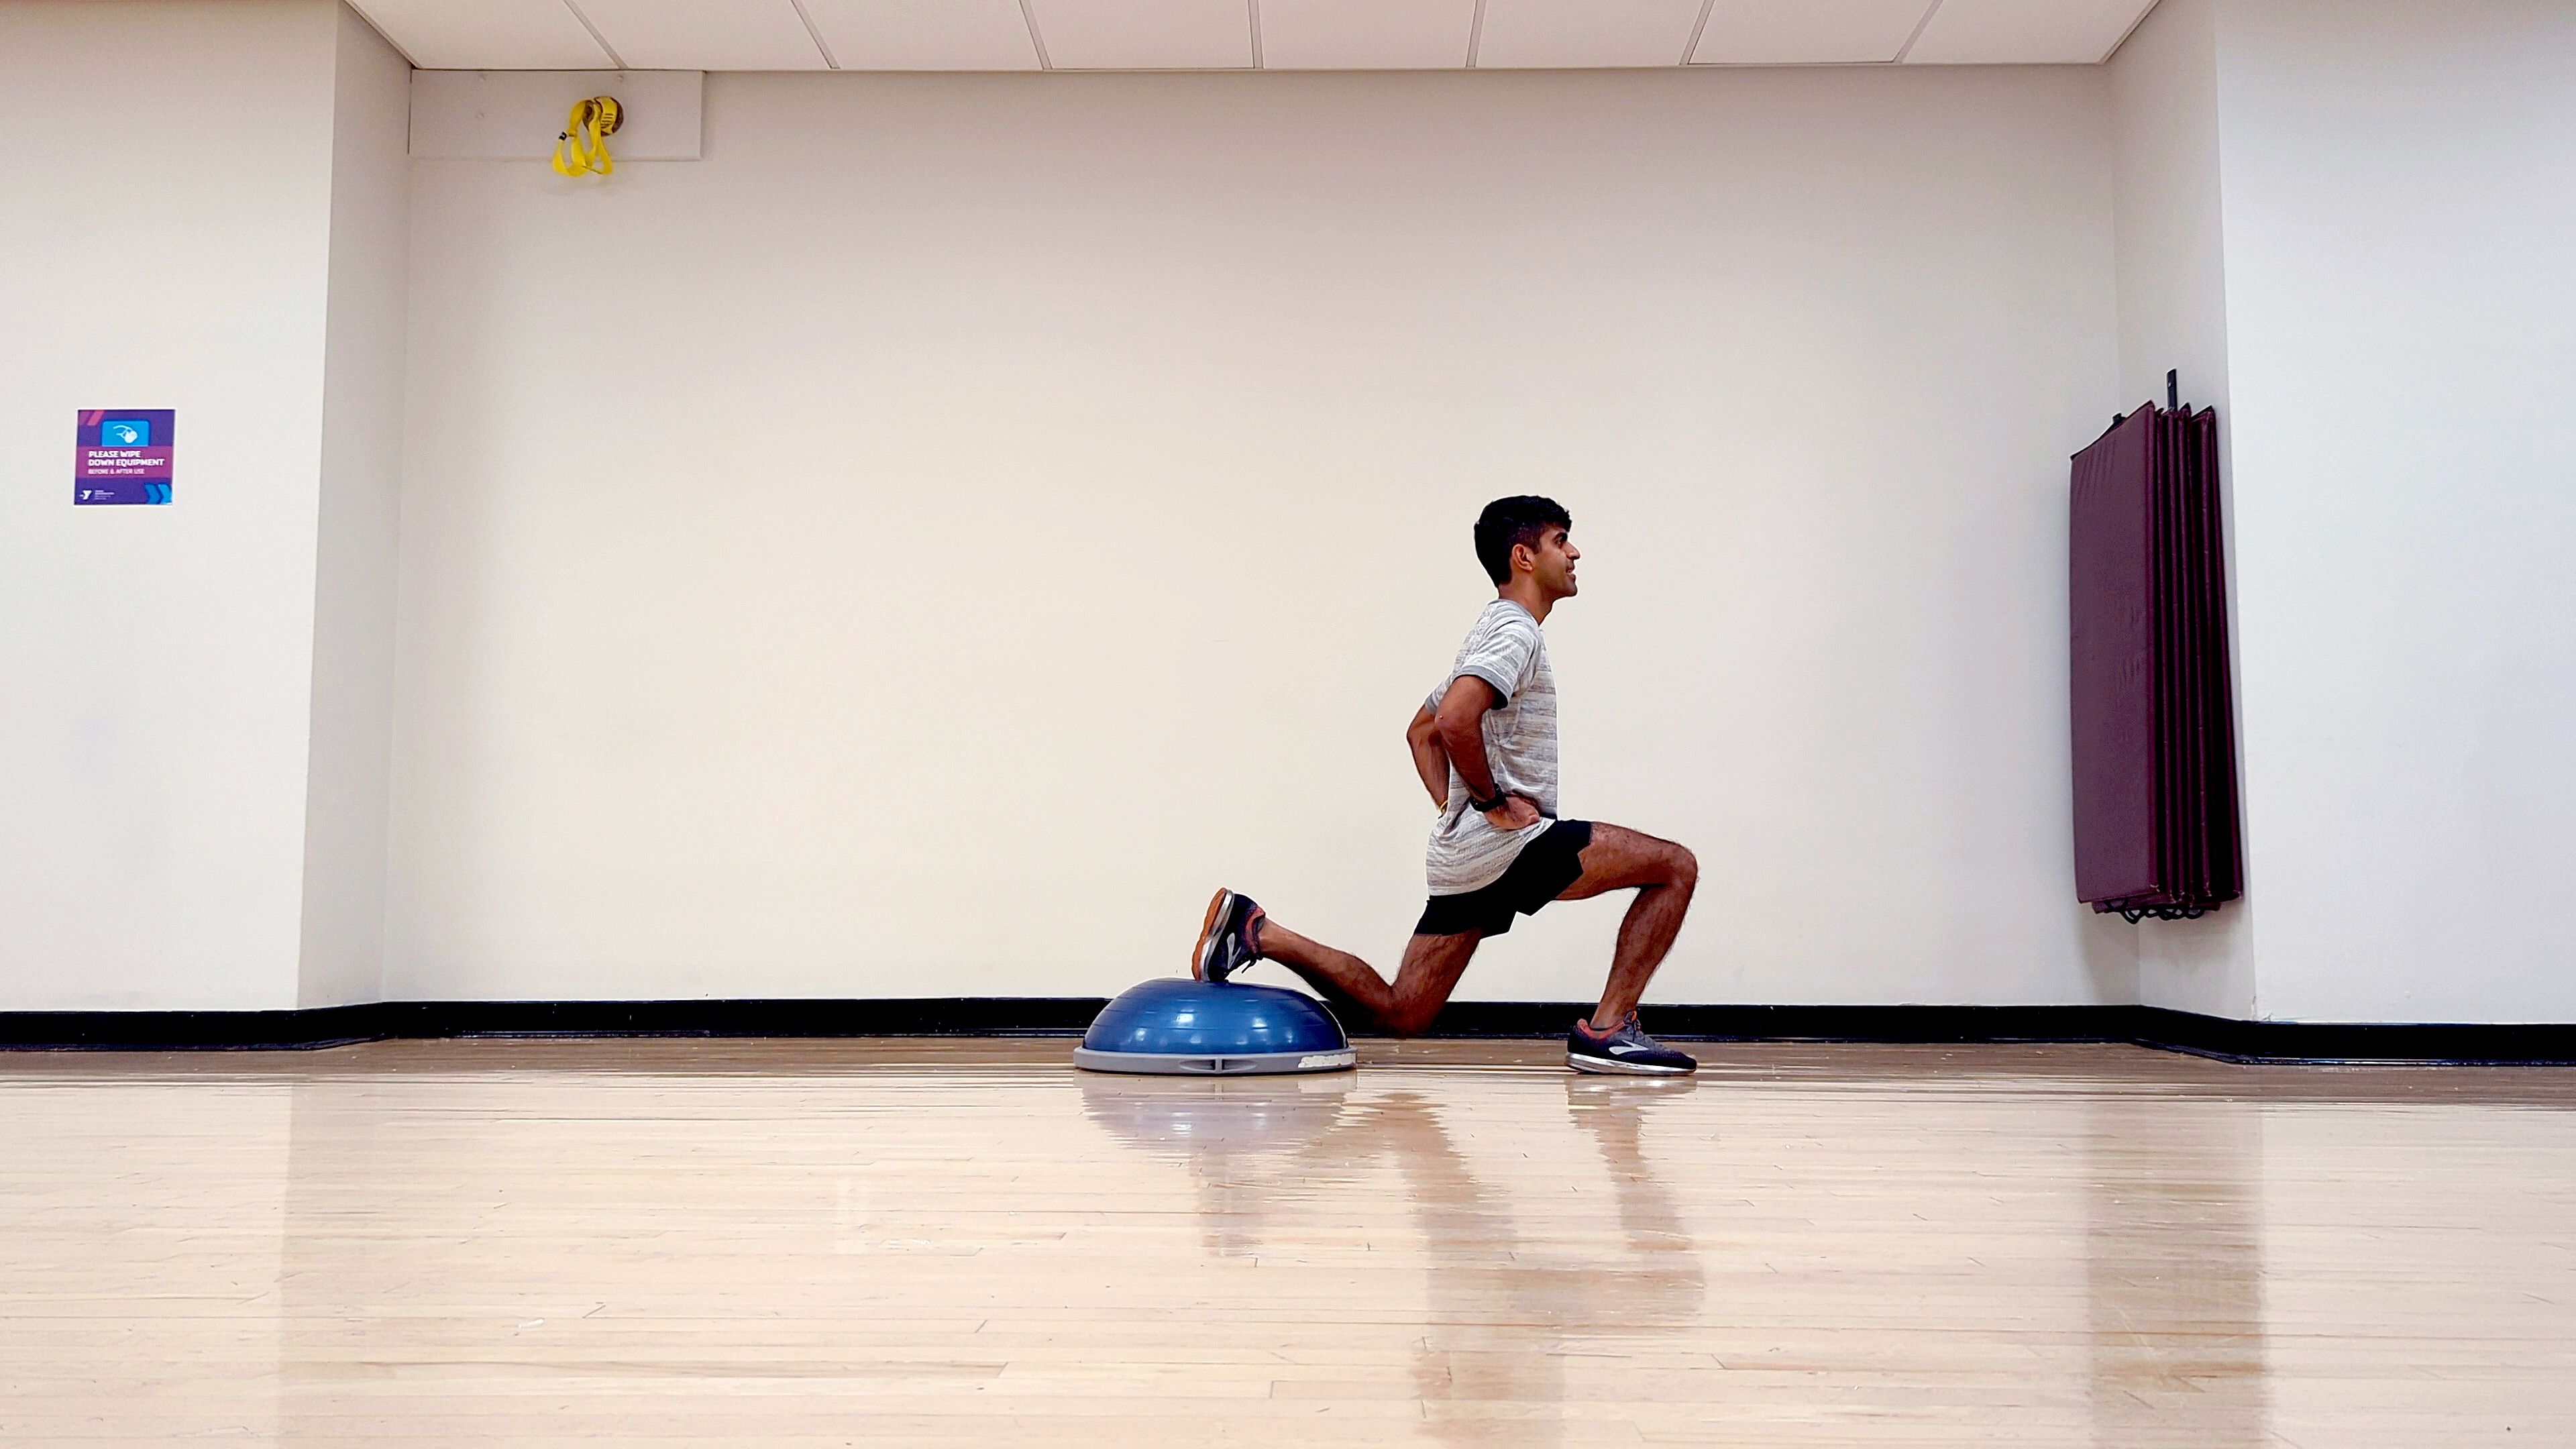 This Total-Body Exercise Ball Workout Will Make Your Abs Work Overtime